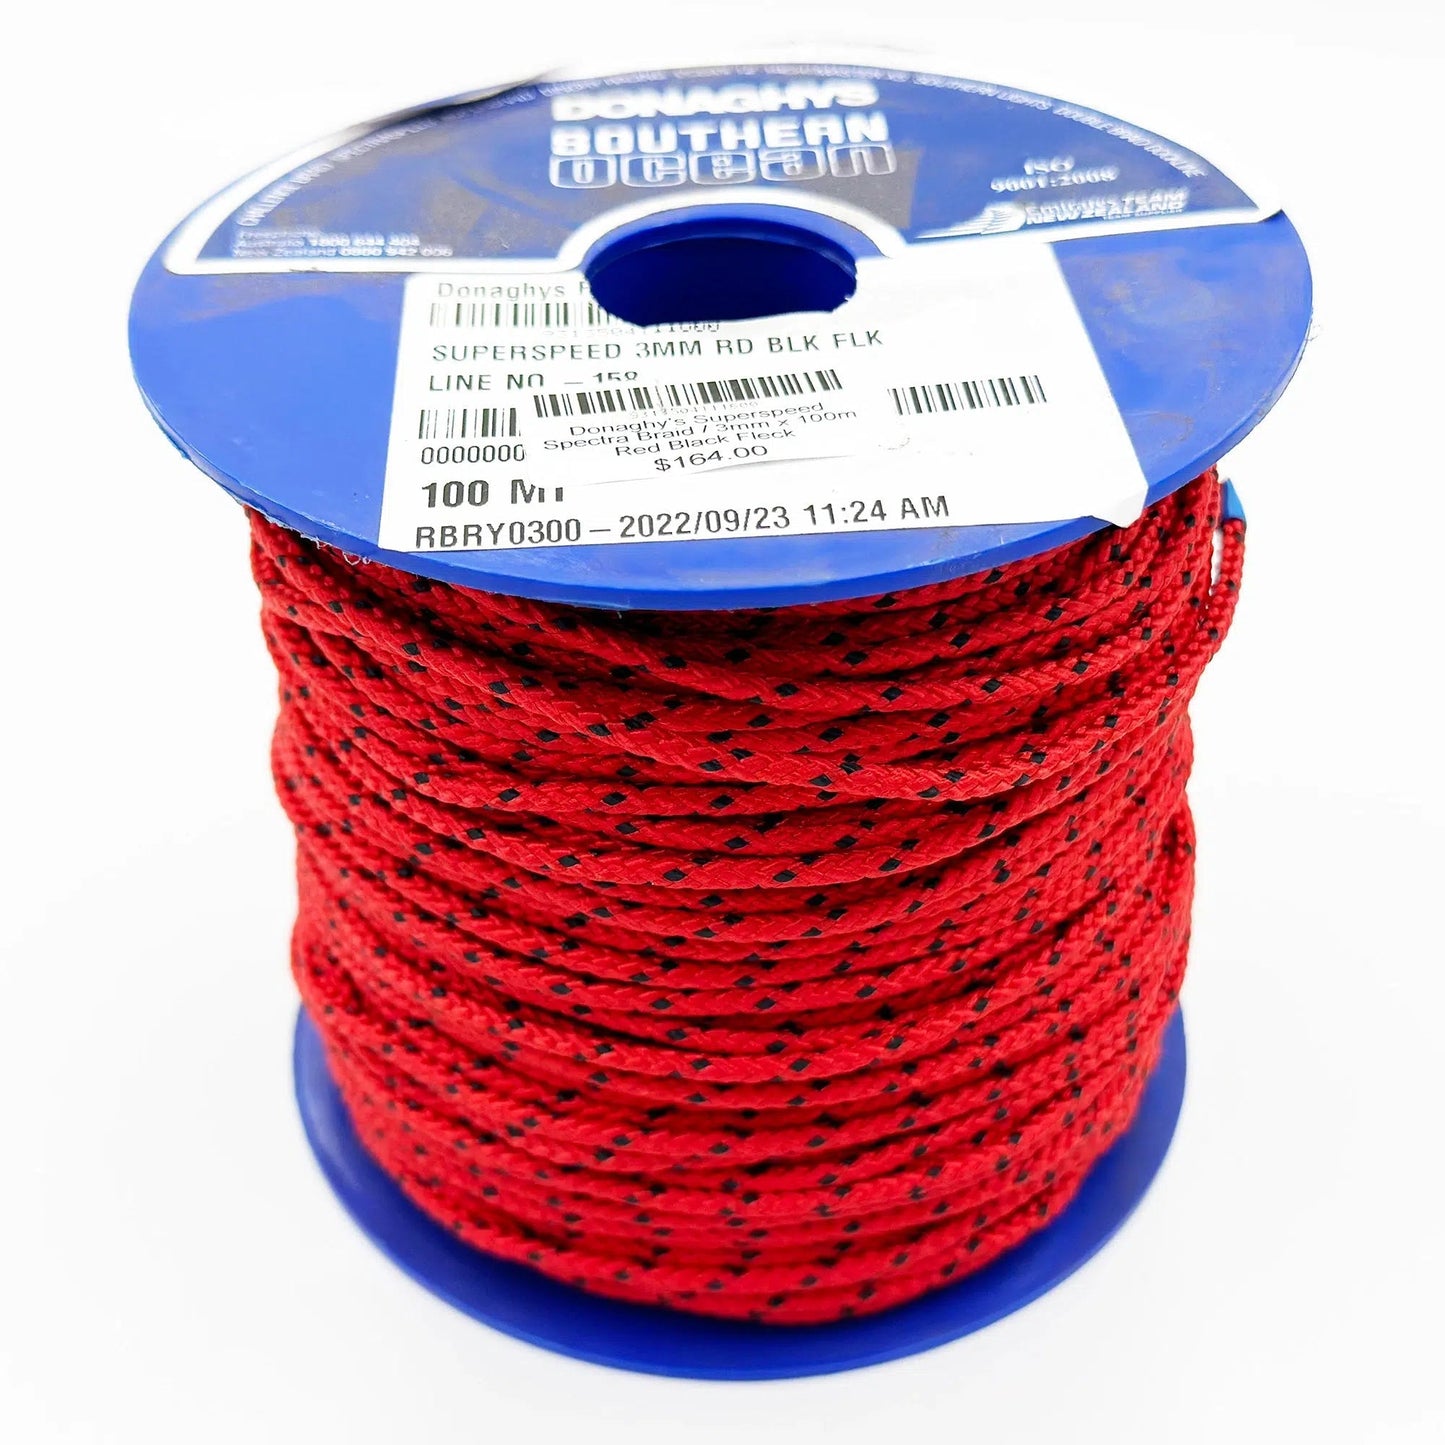 Donaghy's Superspeed Spectra Braid-Line - Braid-Donaghy's-3mm x 100m Red Black Fleck-Fishing Station